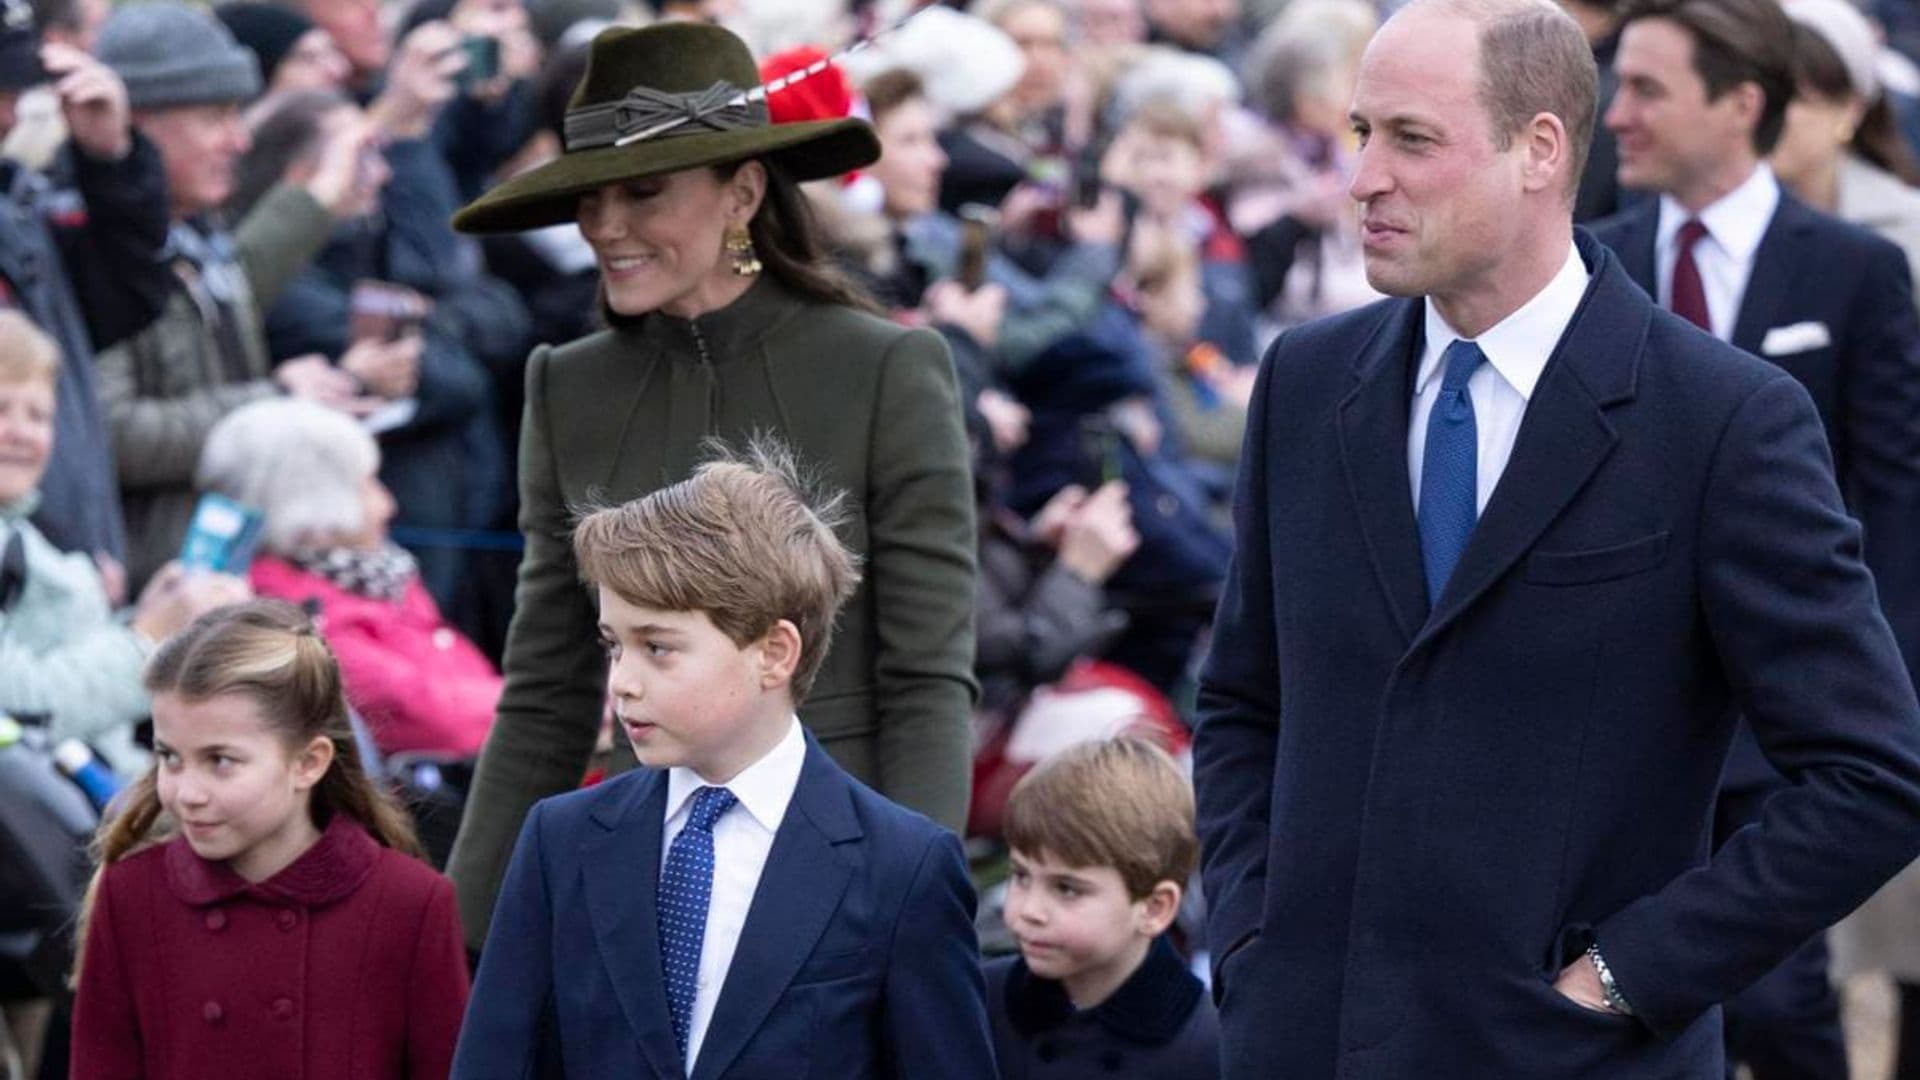 Louis, Charlotte, George and more royal kids steal the show on Christmas morning